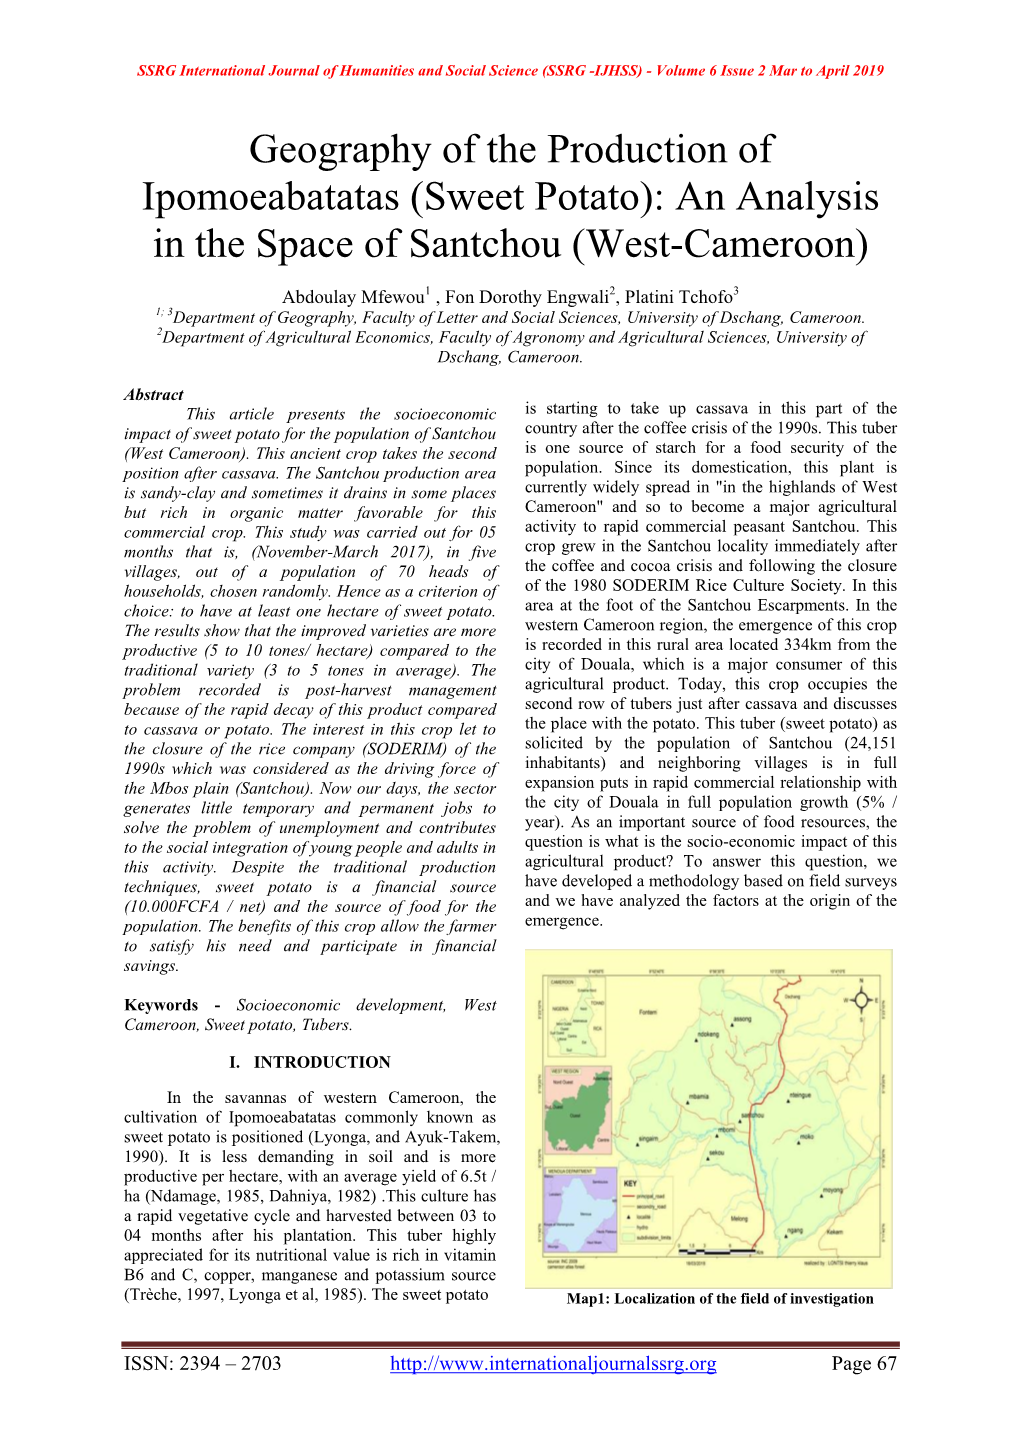 Sweet Potato): an Analysis in the Space of Santchou (West-Cameroon)